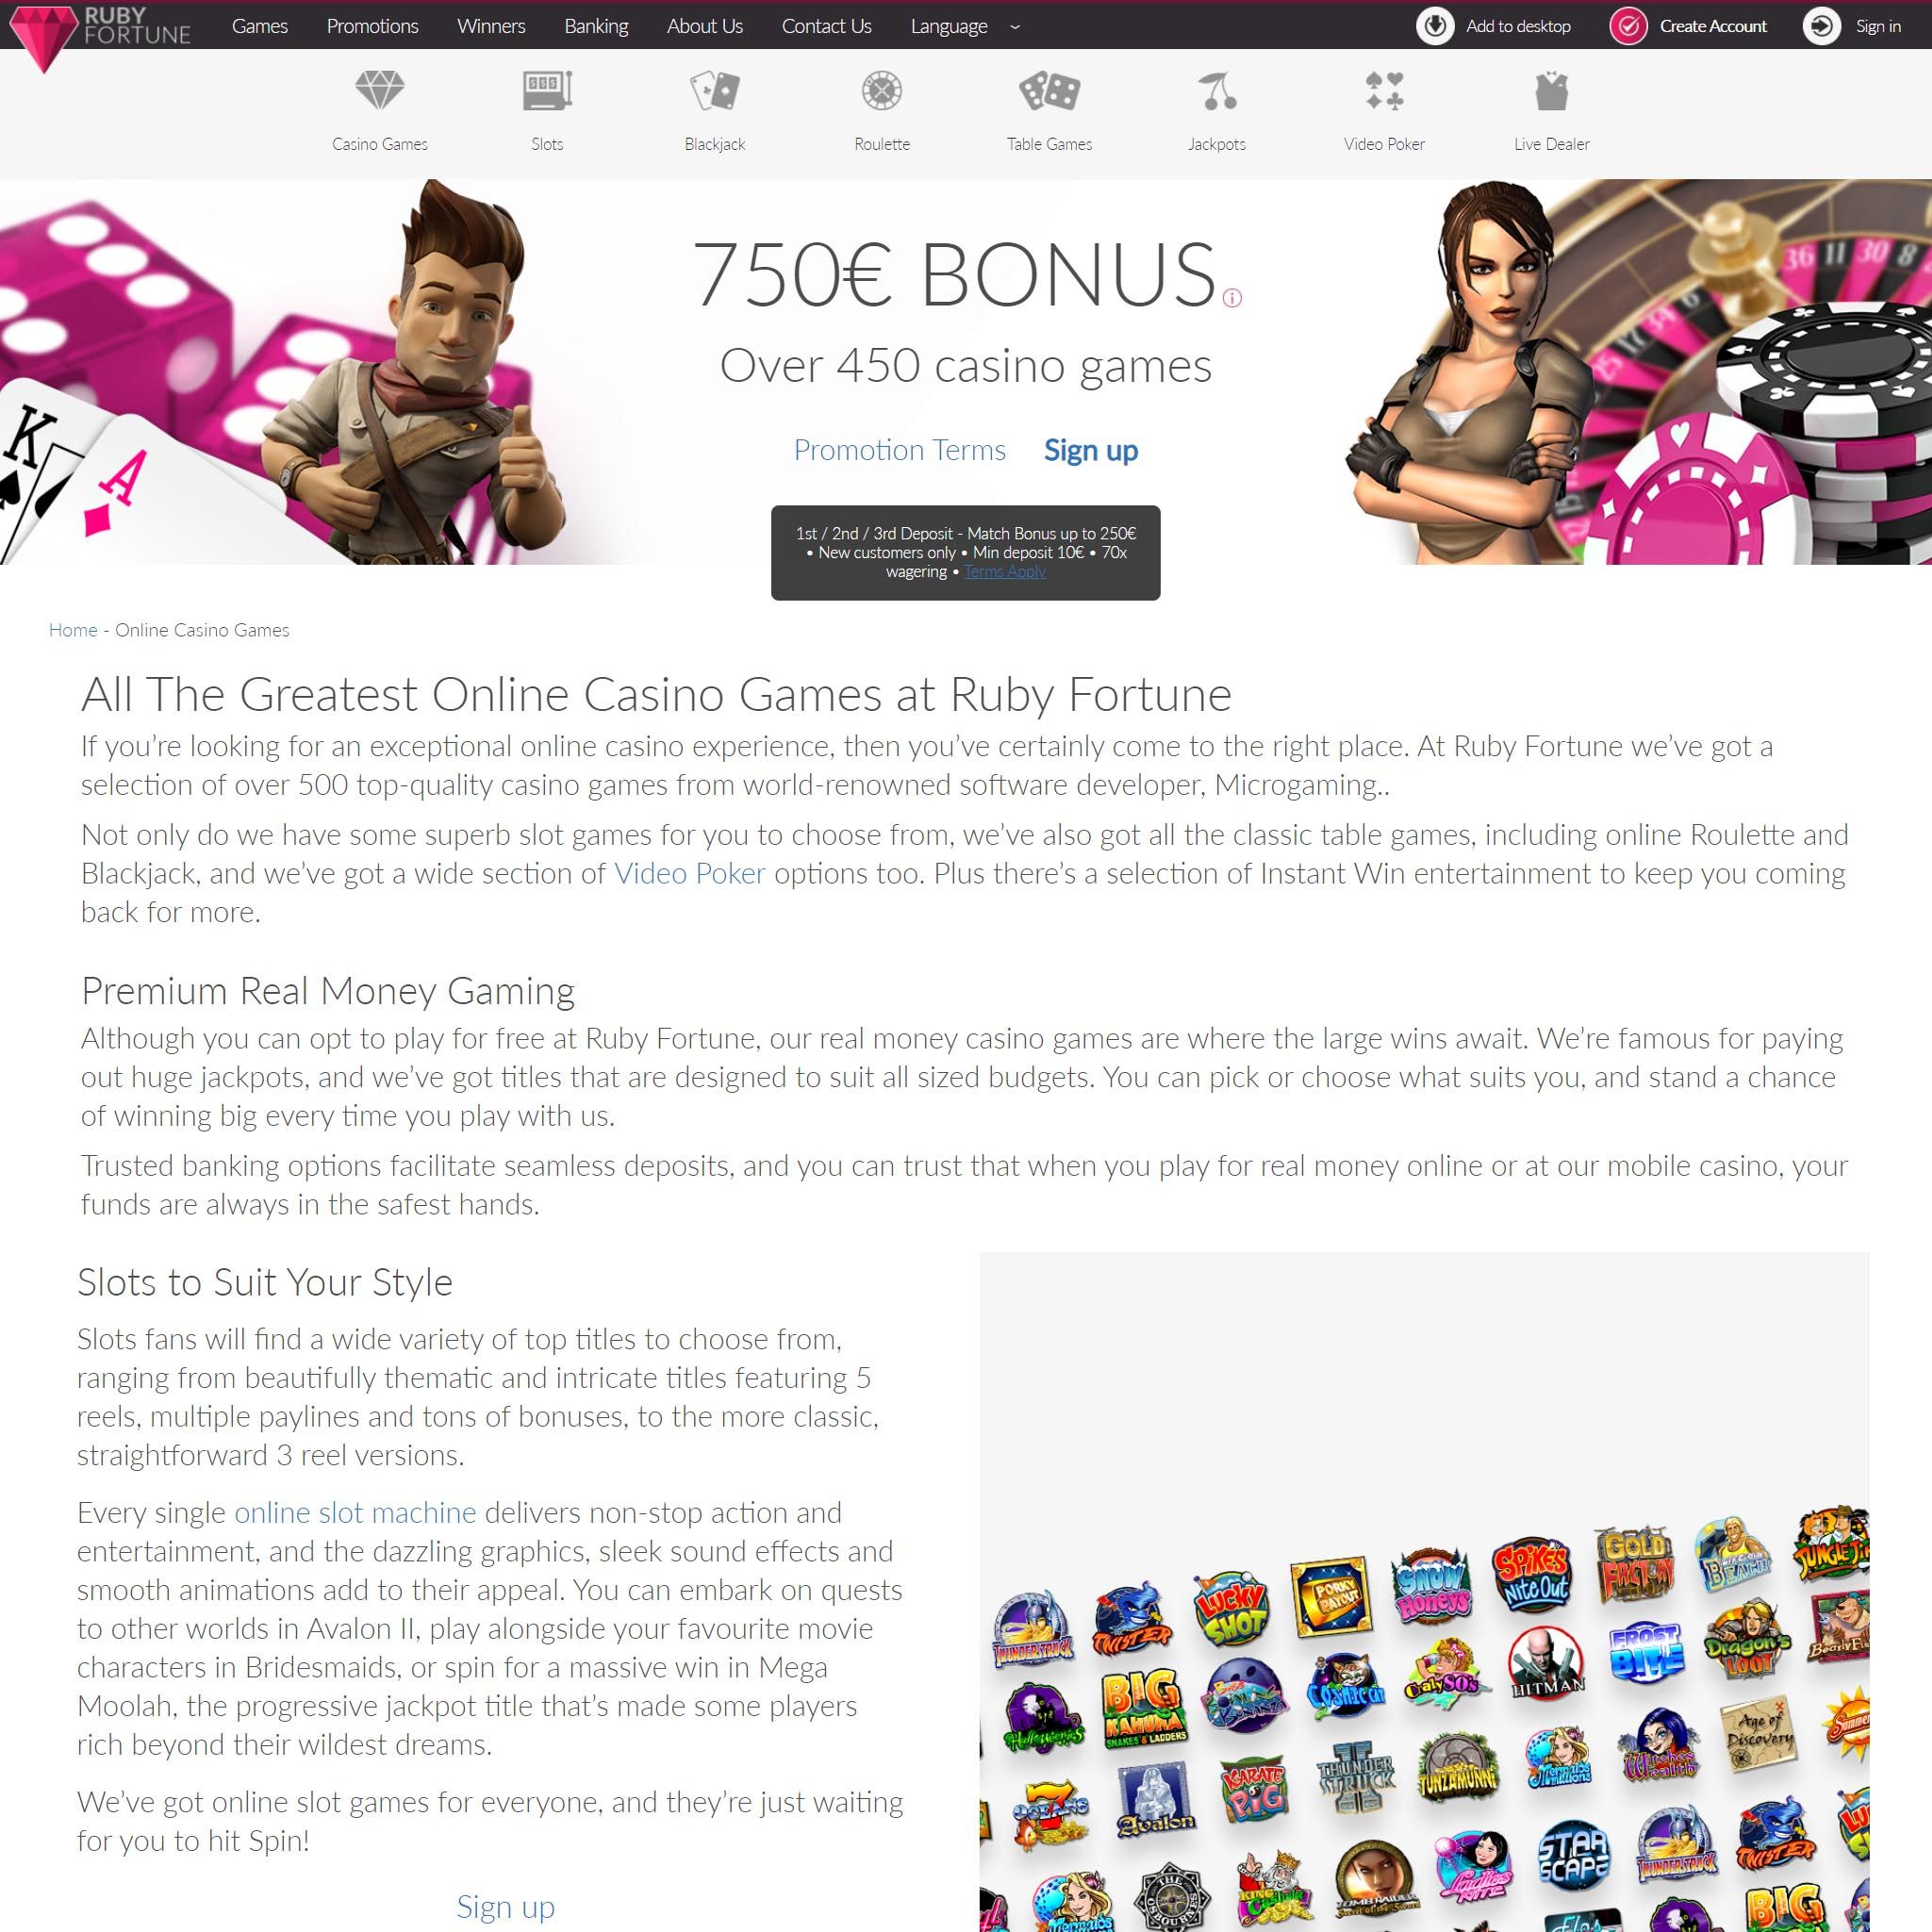 Ruby Fortune Casino game catalogue